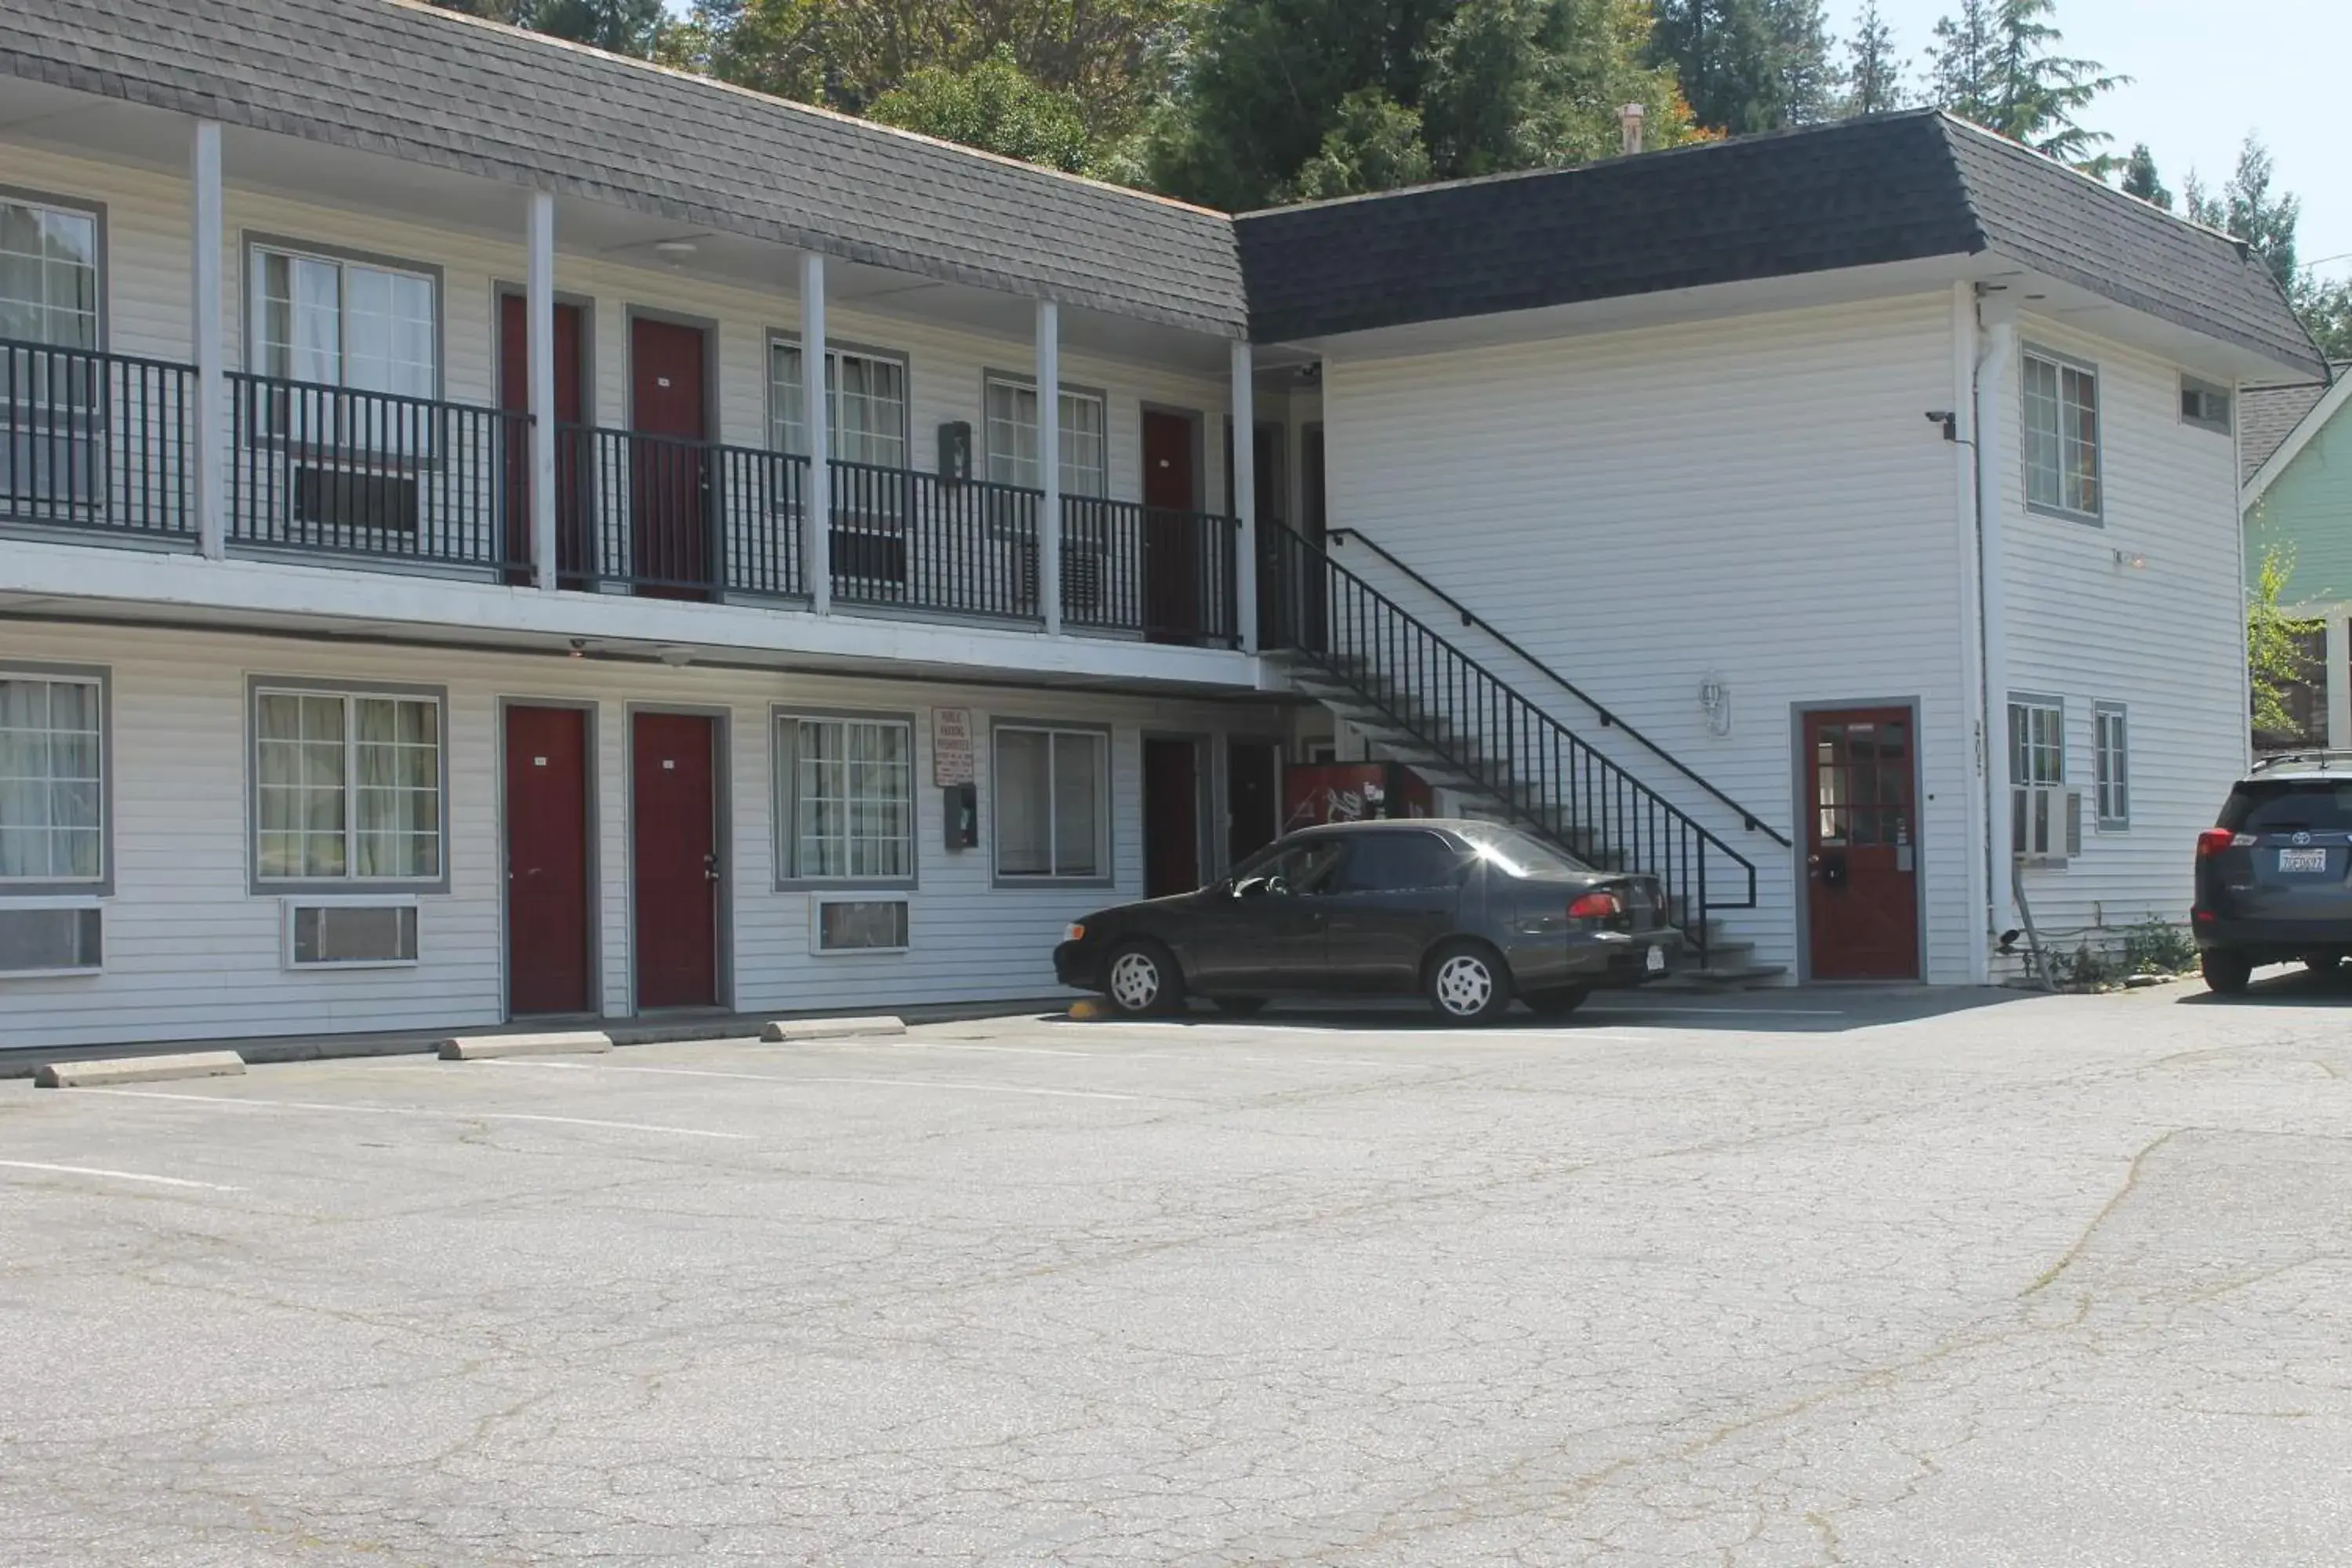 Street view, Property Building in Stagecoach Motel